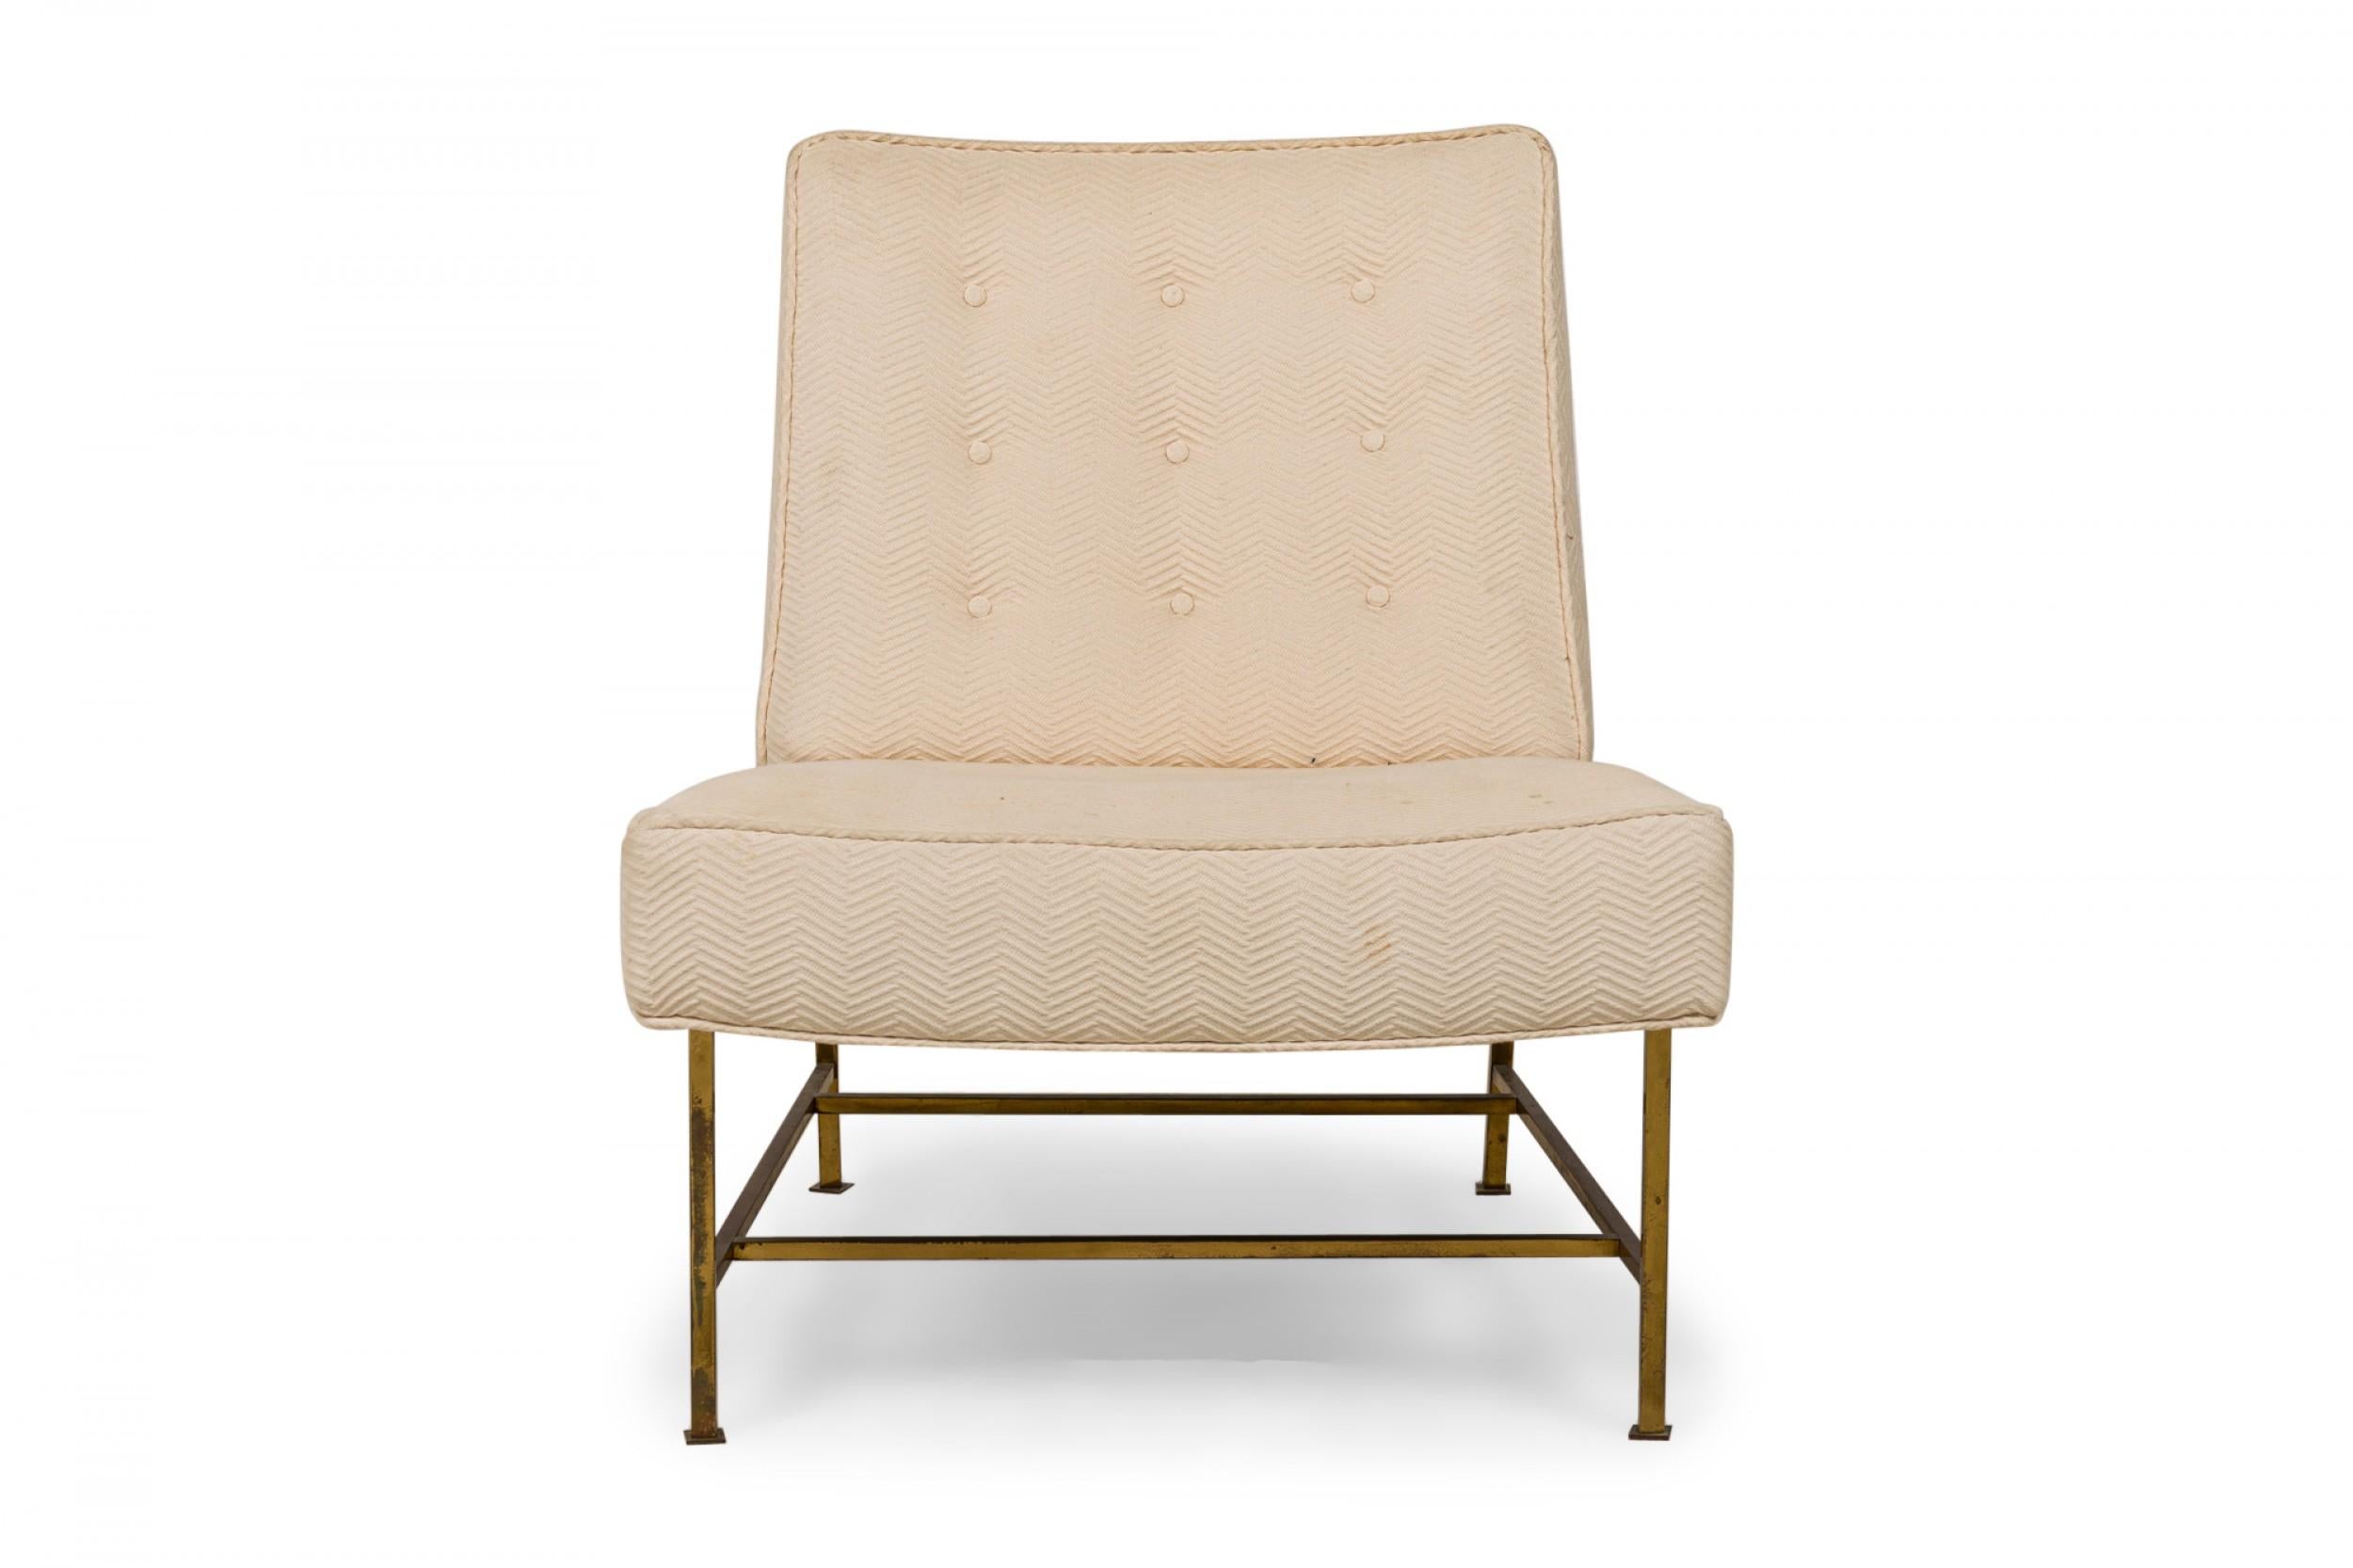 Pair of American mid-century slipper / side chairs with zig-zag textured beige button tufted fabric upholstered seats and backs, resting on a brass square tube stretcher base with legs ending in square feet. (HARVEY PROBBER)(PRICED AS PAIR)
 